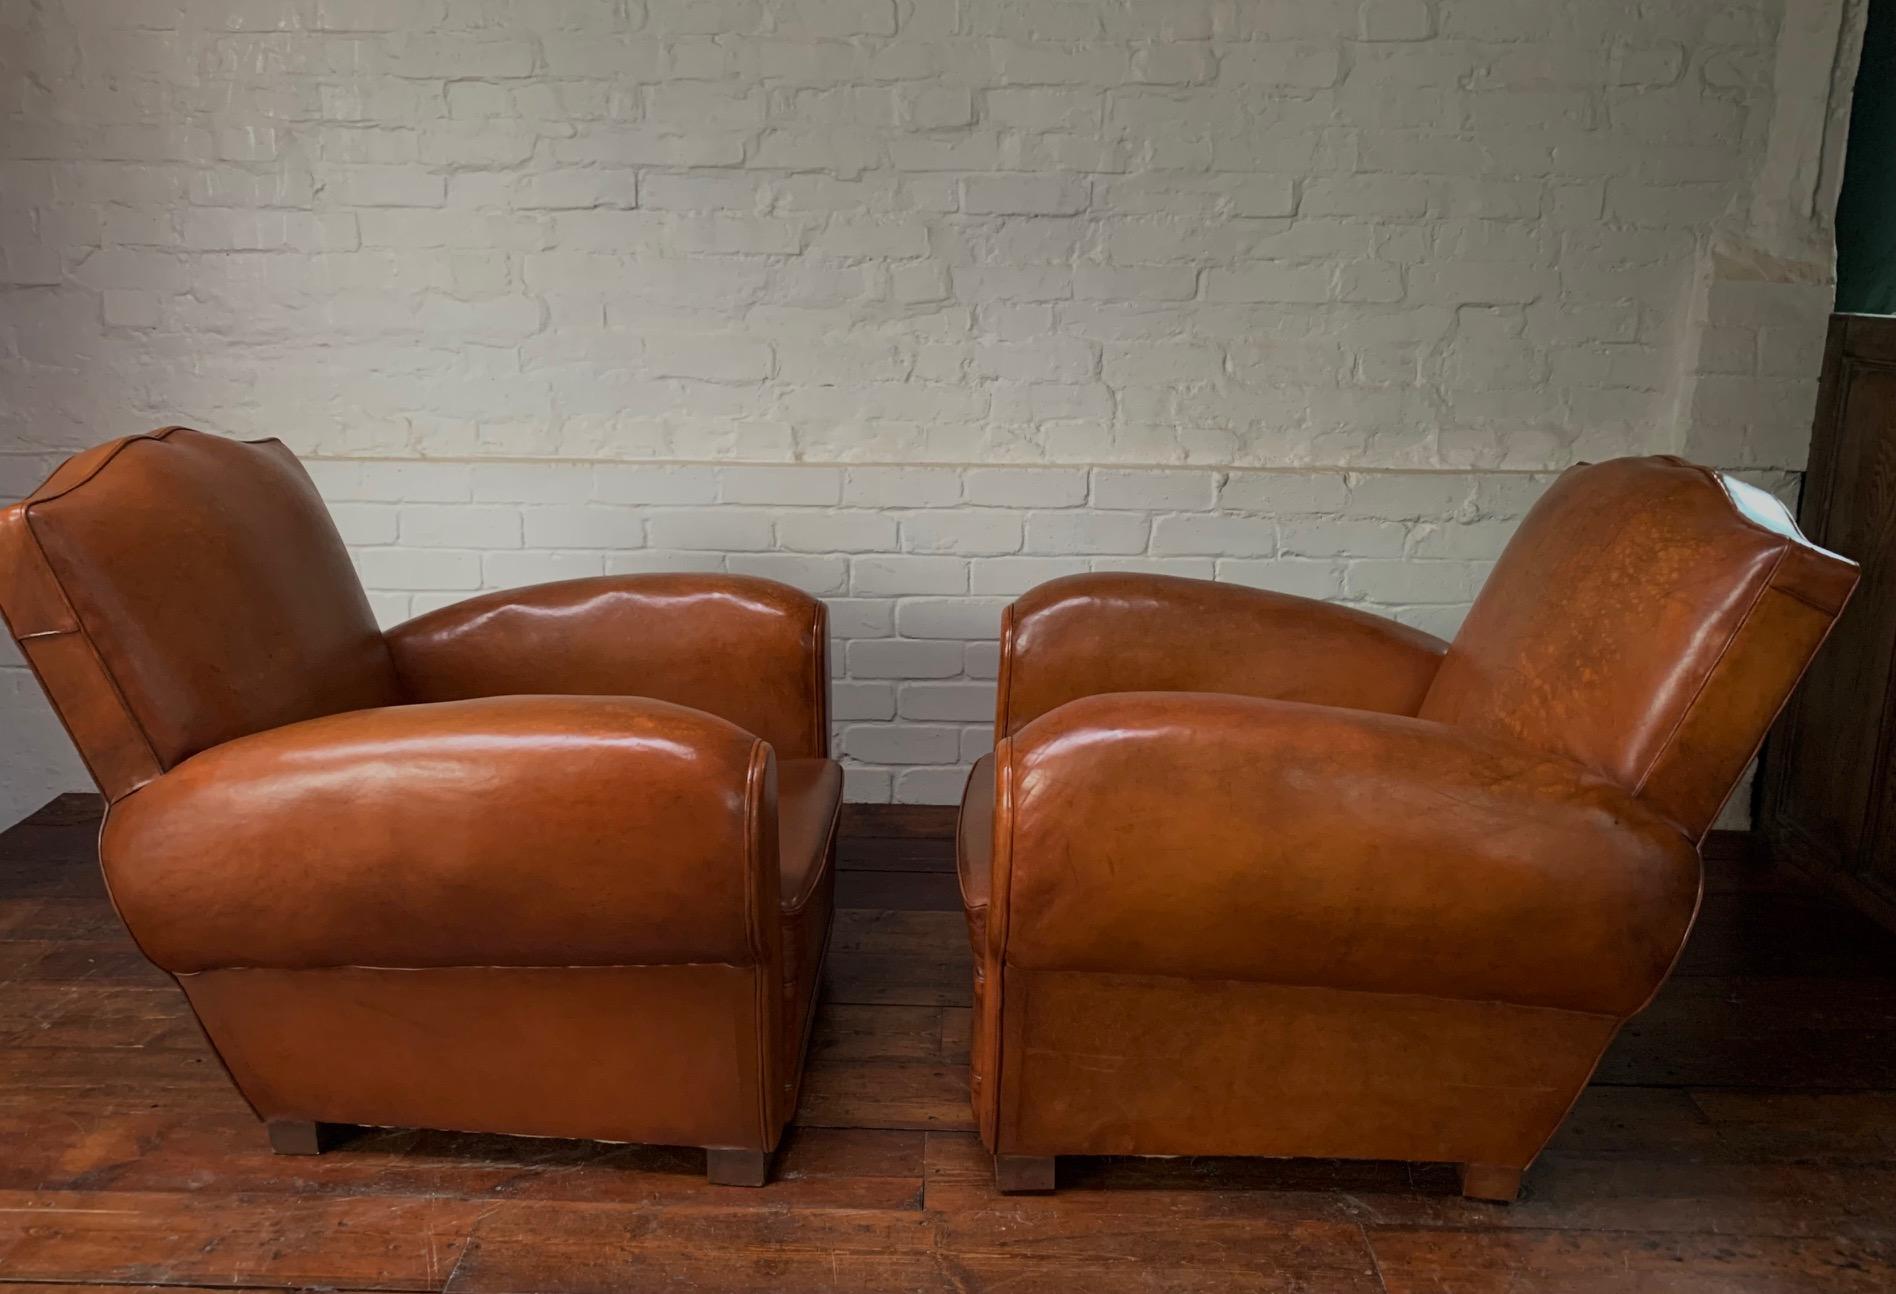 A Stunning Pair of French Leather Club Chairs, Caramel Moustache Models, C1940's 1